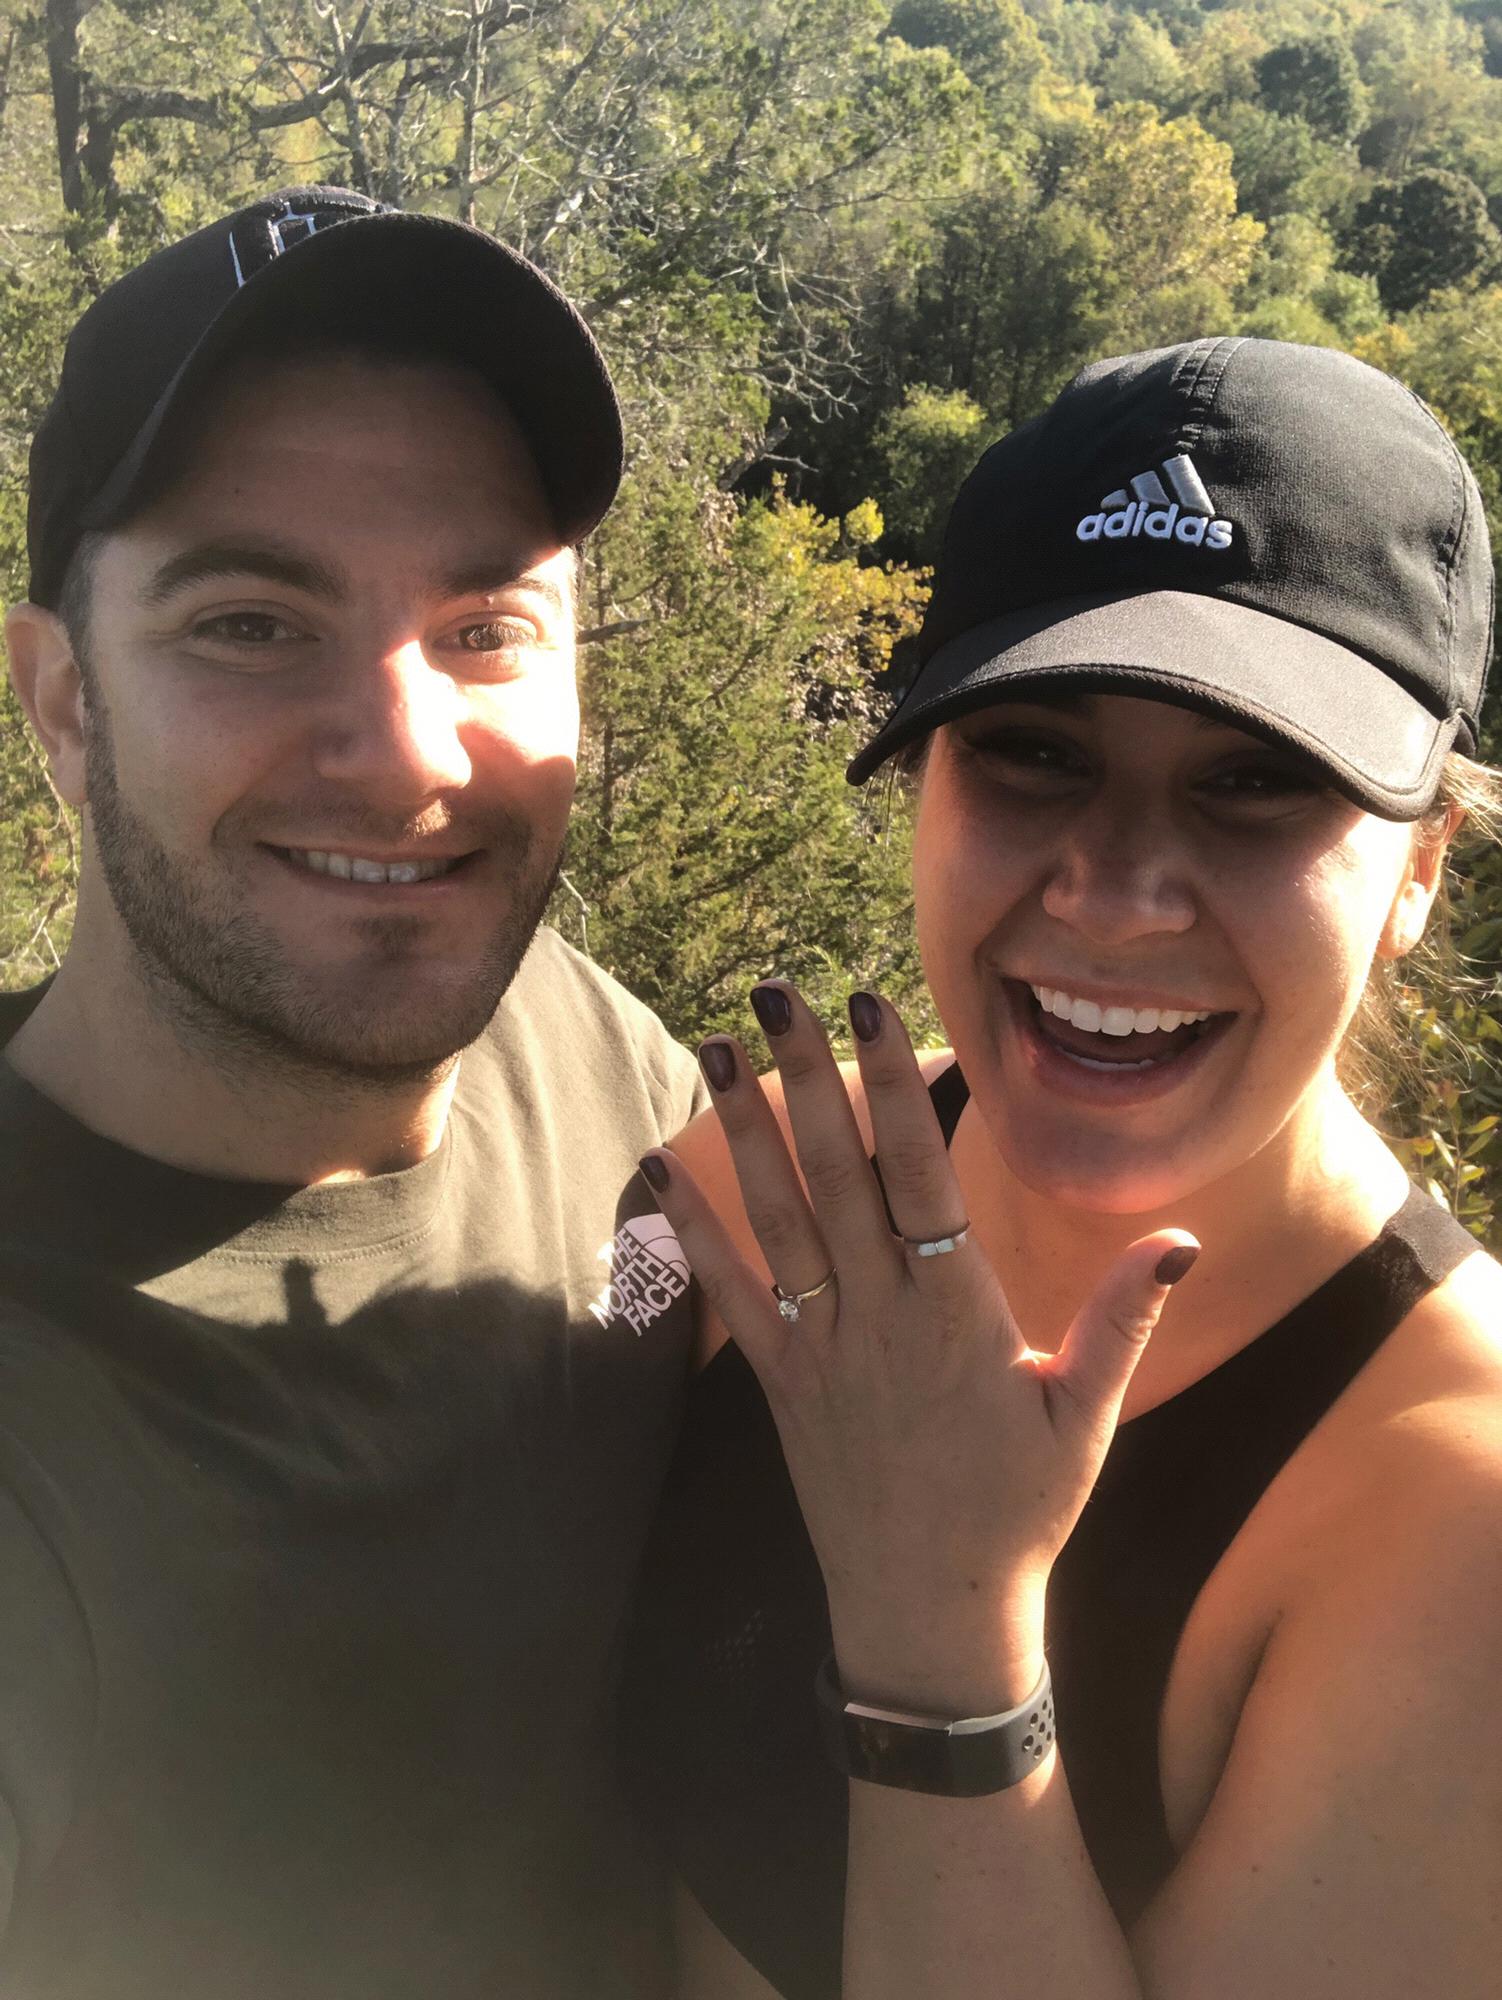 10.5.19 - right after Joe popped the question at the Narrows lookout